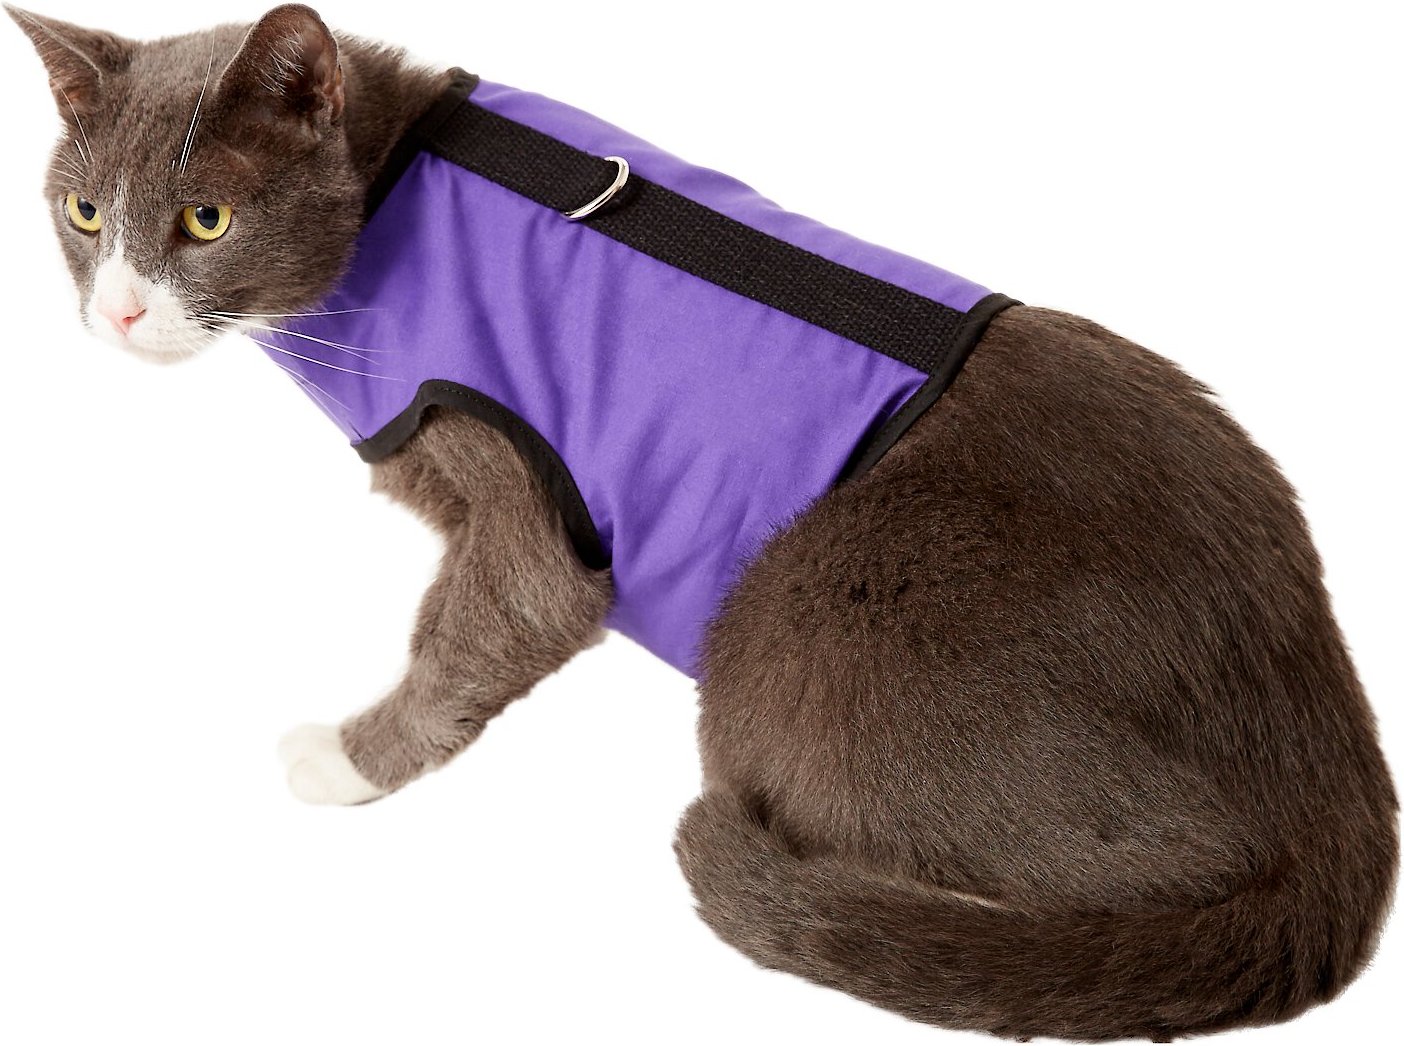 kitty wearing an escape proof cat harness